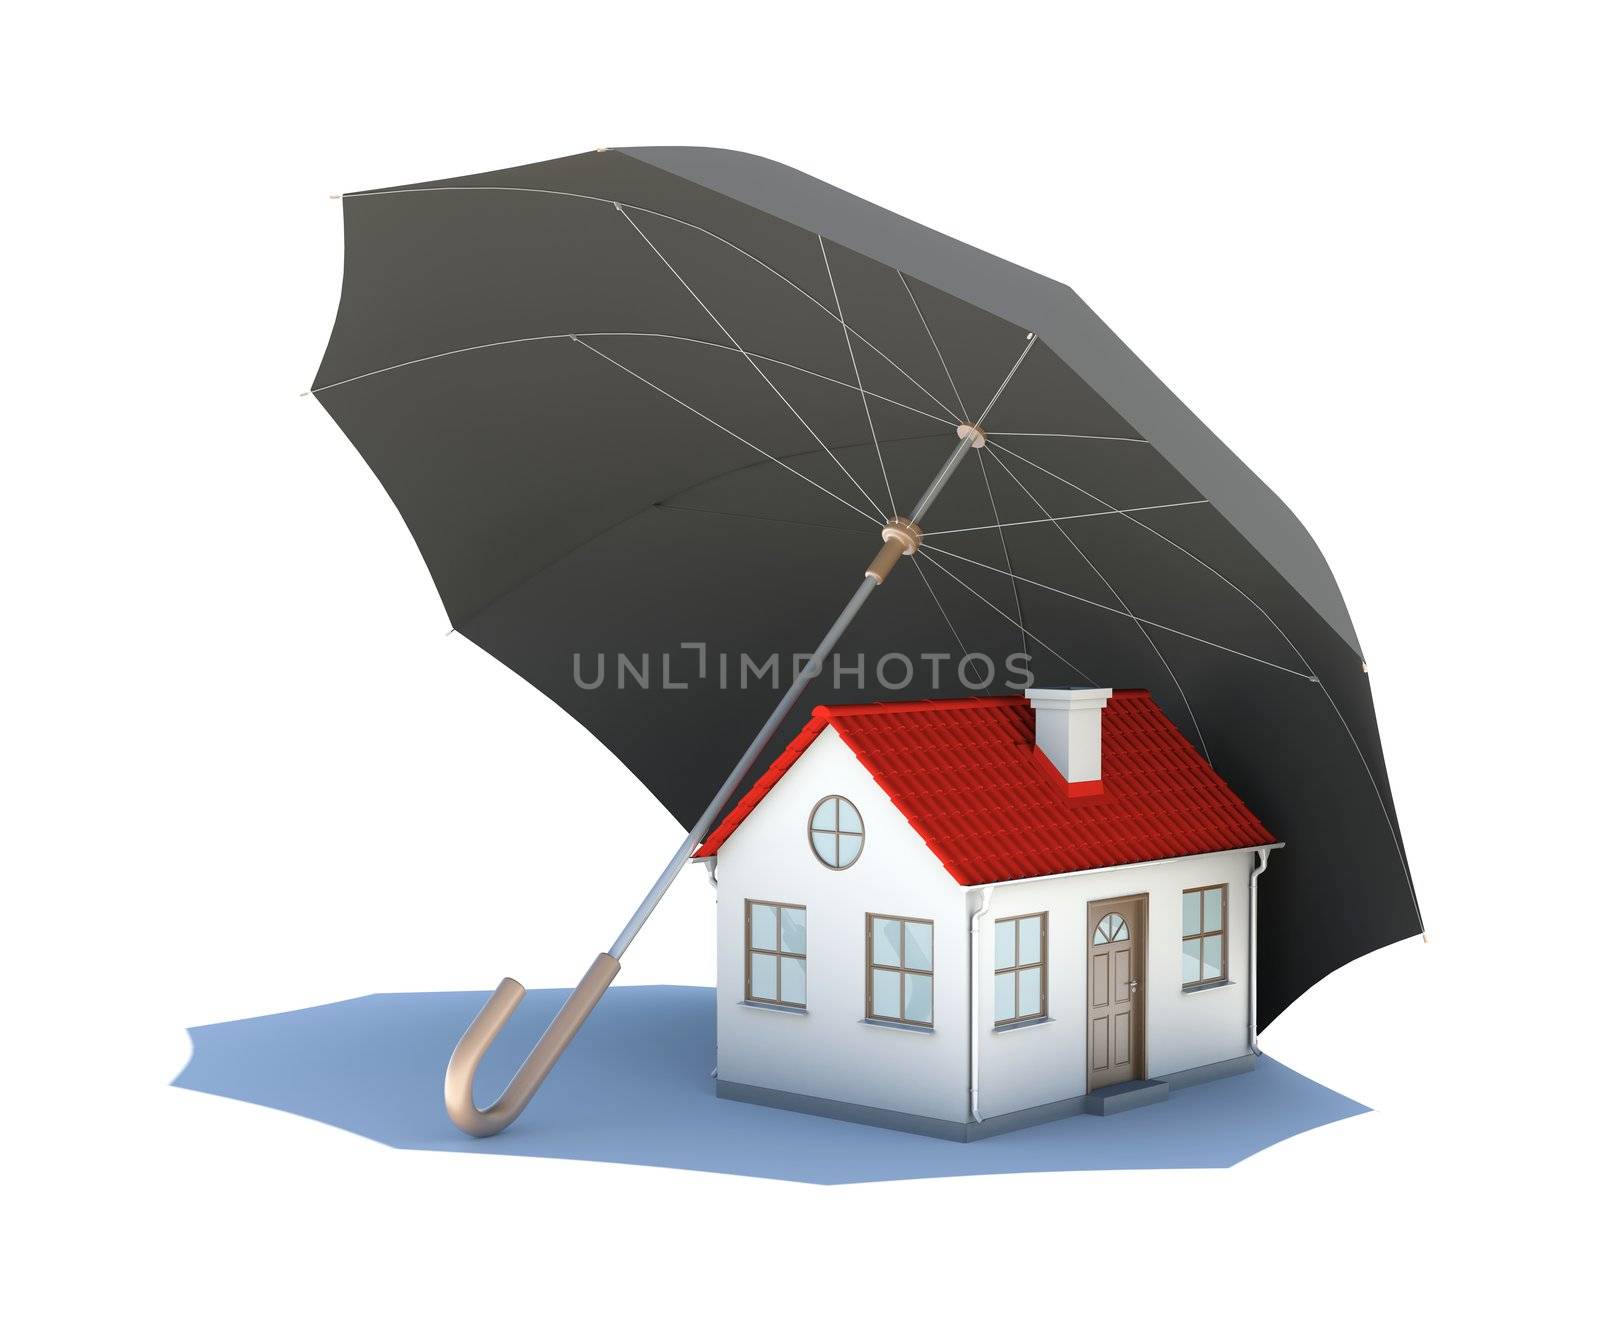 Umbrella covering the house. Isolated on white background